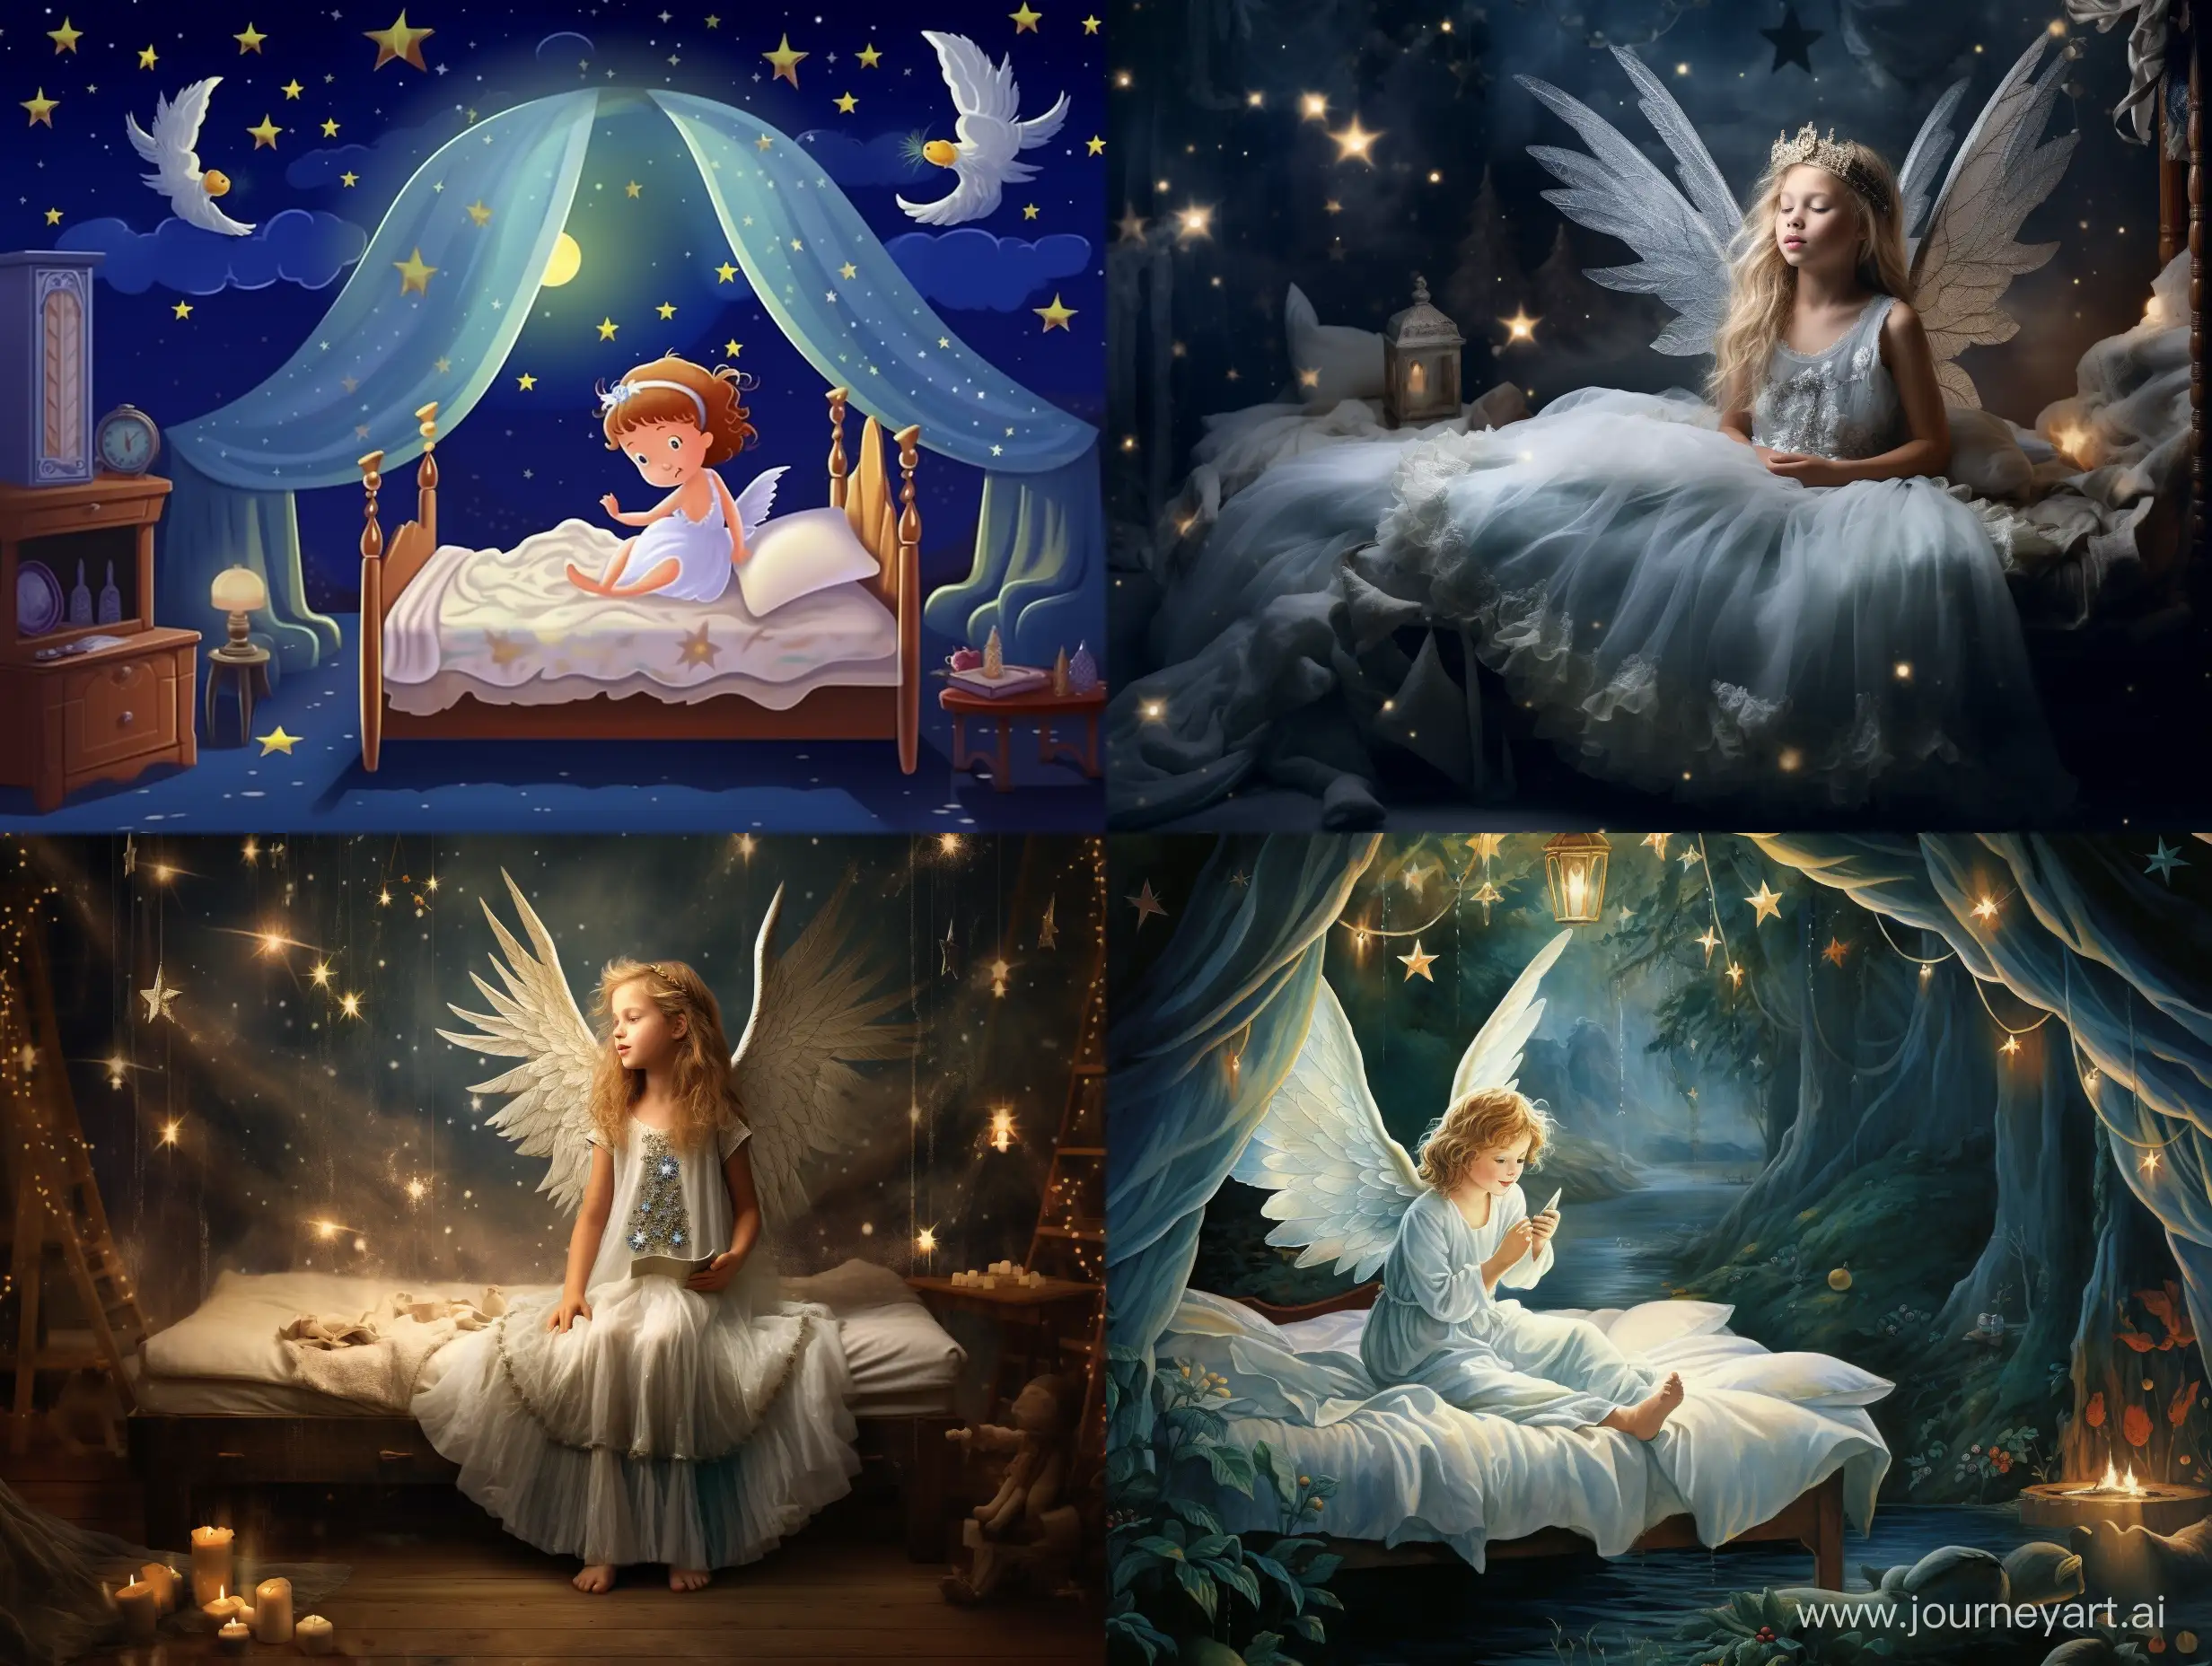 Ethereal-MiddleEastern-Tooth-Fairy-Visiting-a-Sleeping-Child-in-Moonlit-Room